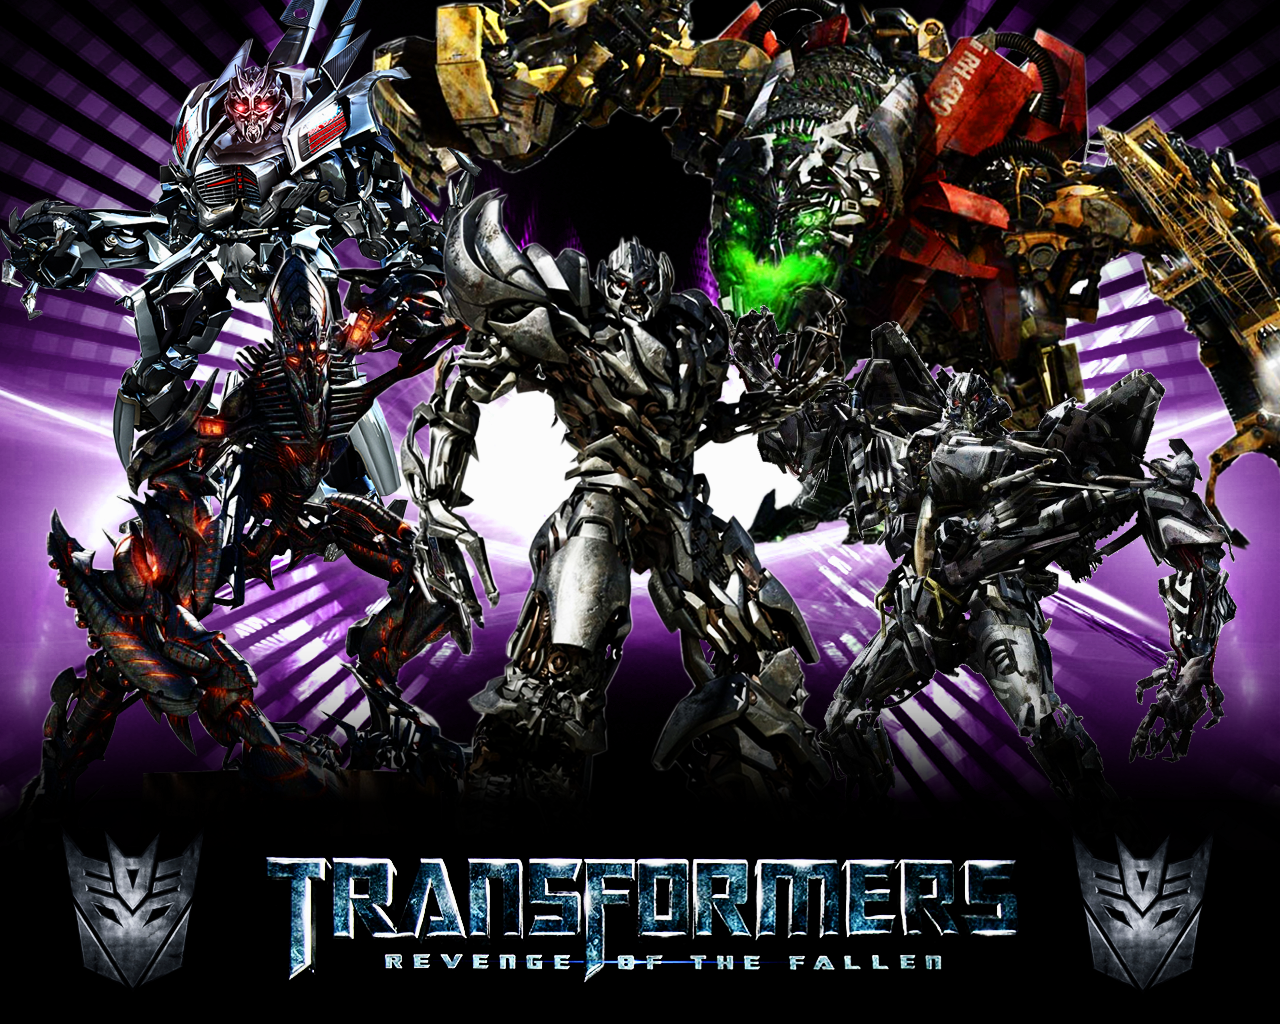 Transformers Decepticons Wallpapers For Iphone - Transformers 2 Revenge Of The Fallen Decepticons , HD Wallpaper & Backgrounds